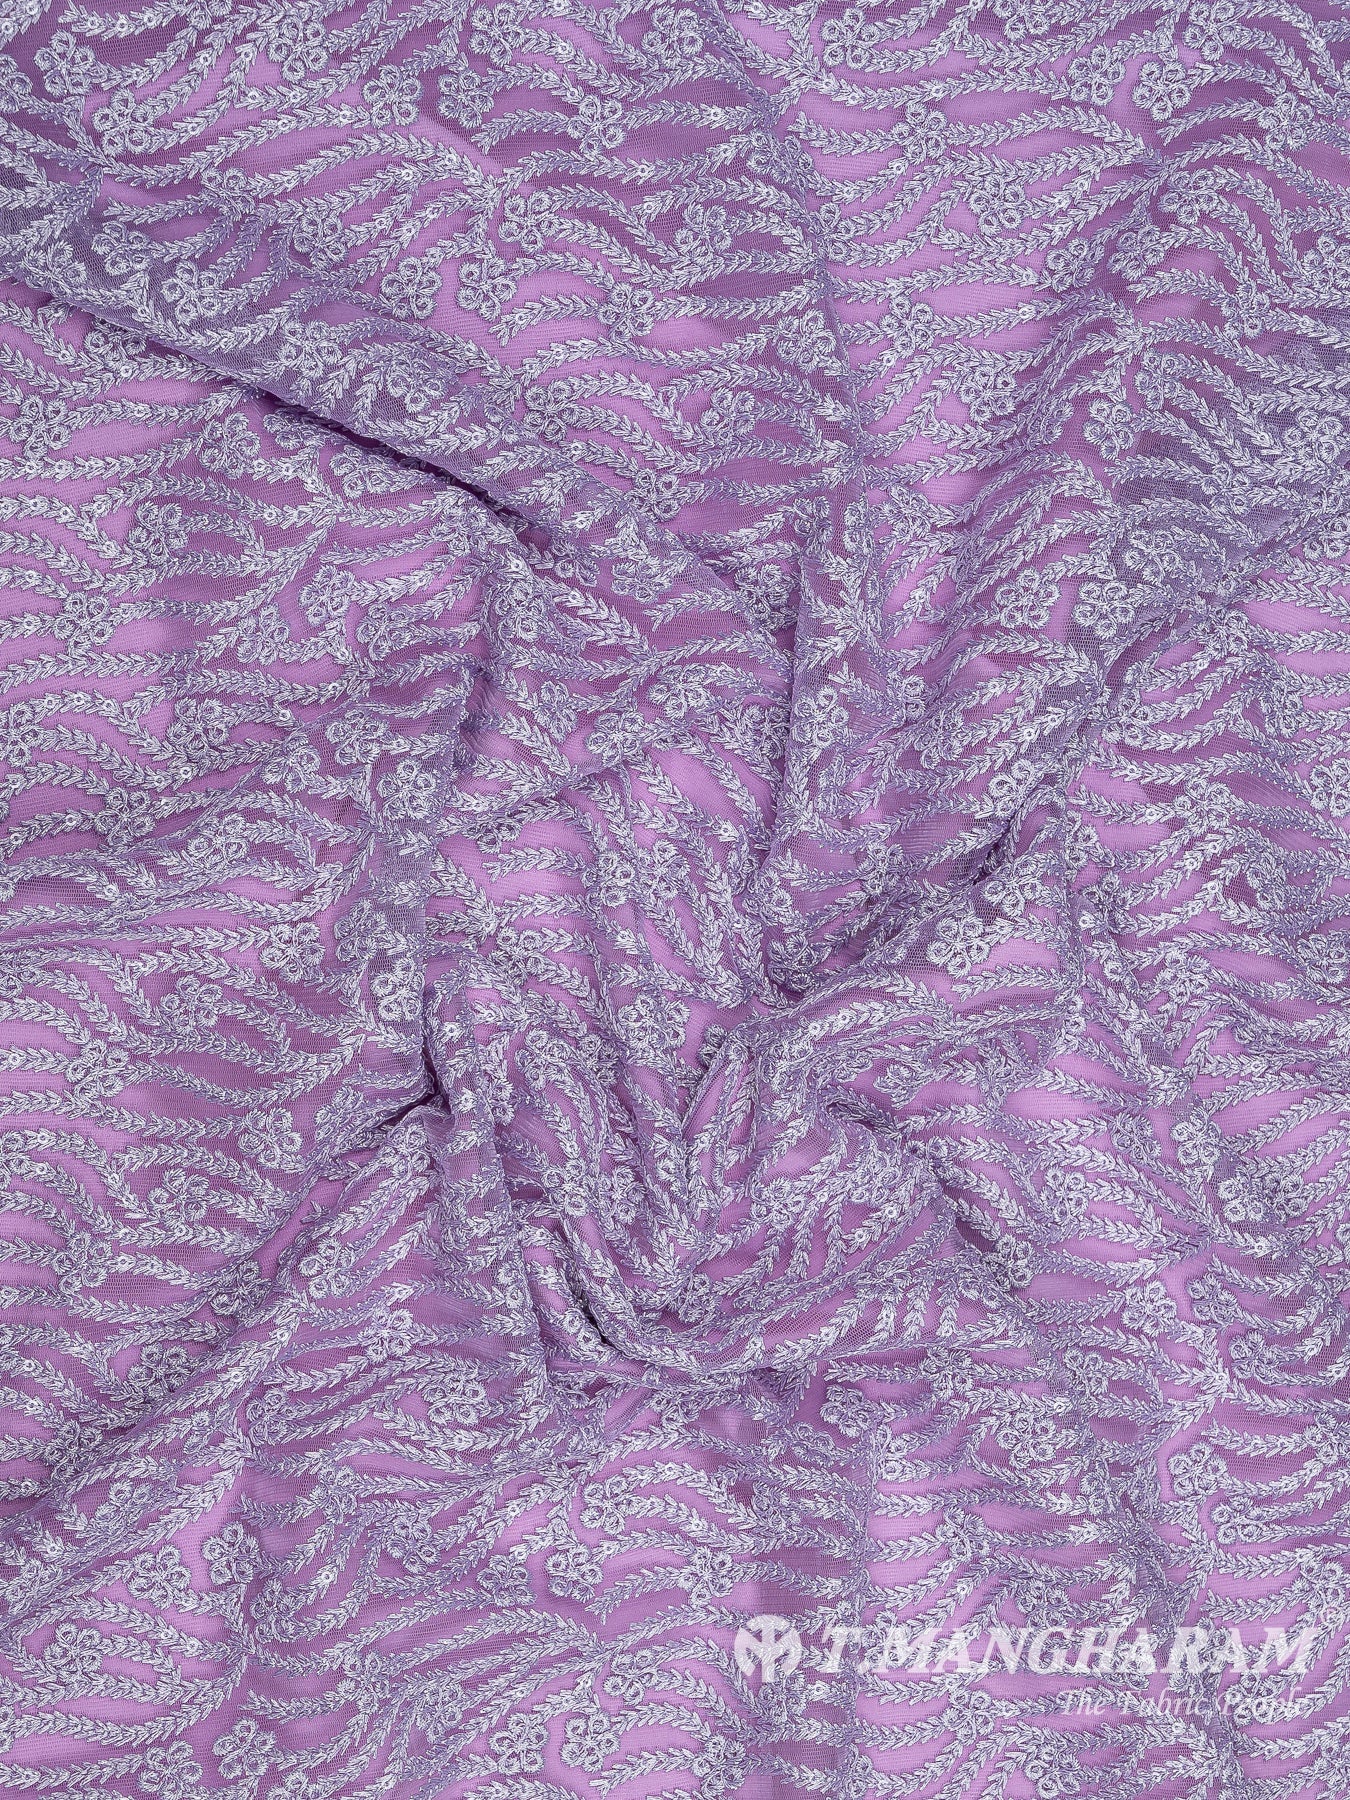 Violet Net Embroidery Fabric - EC8432 view-4